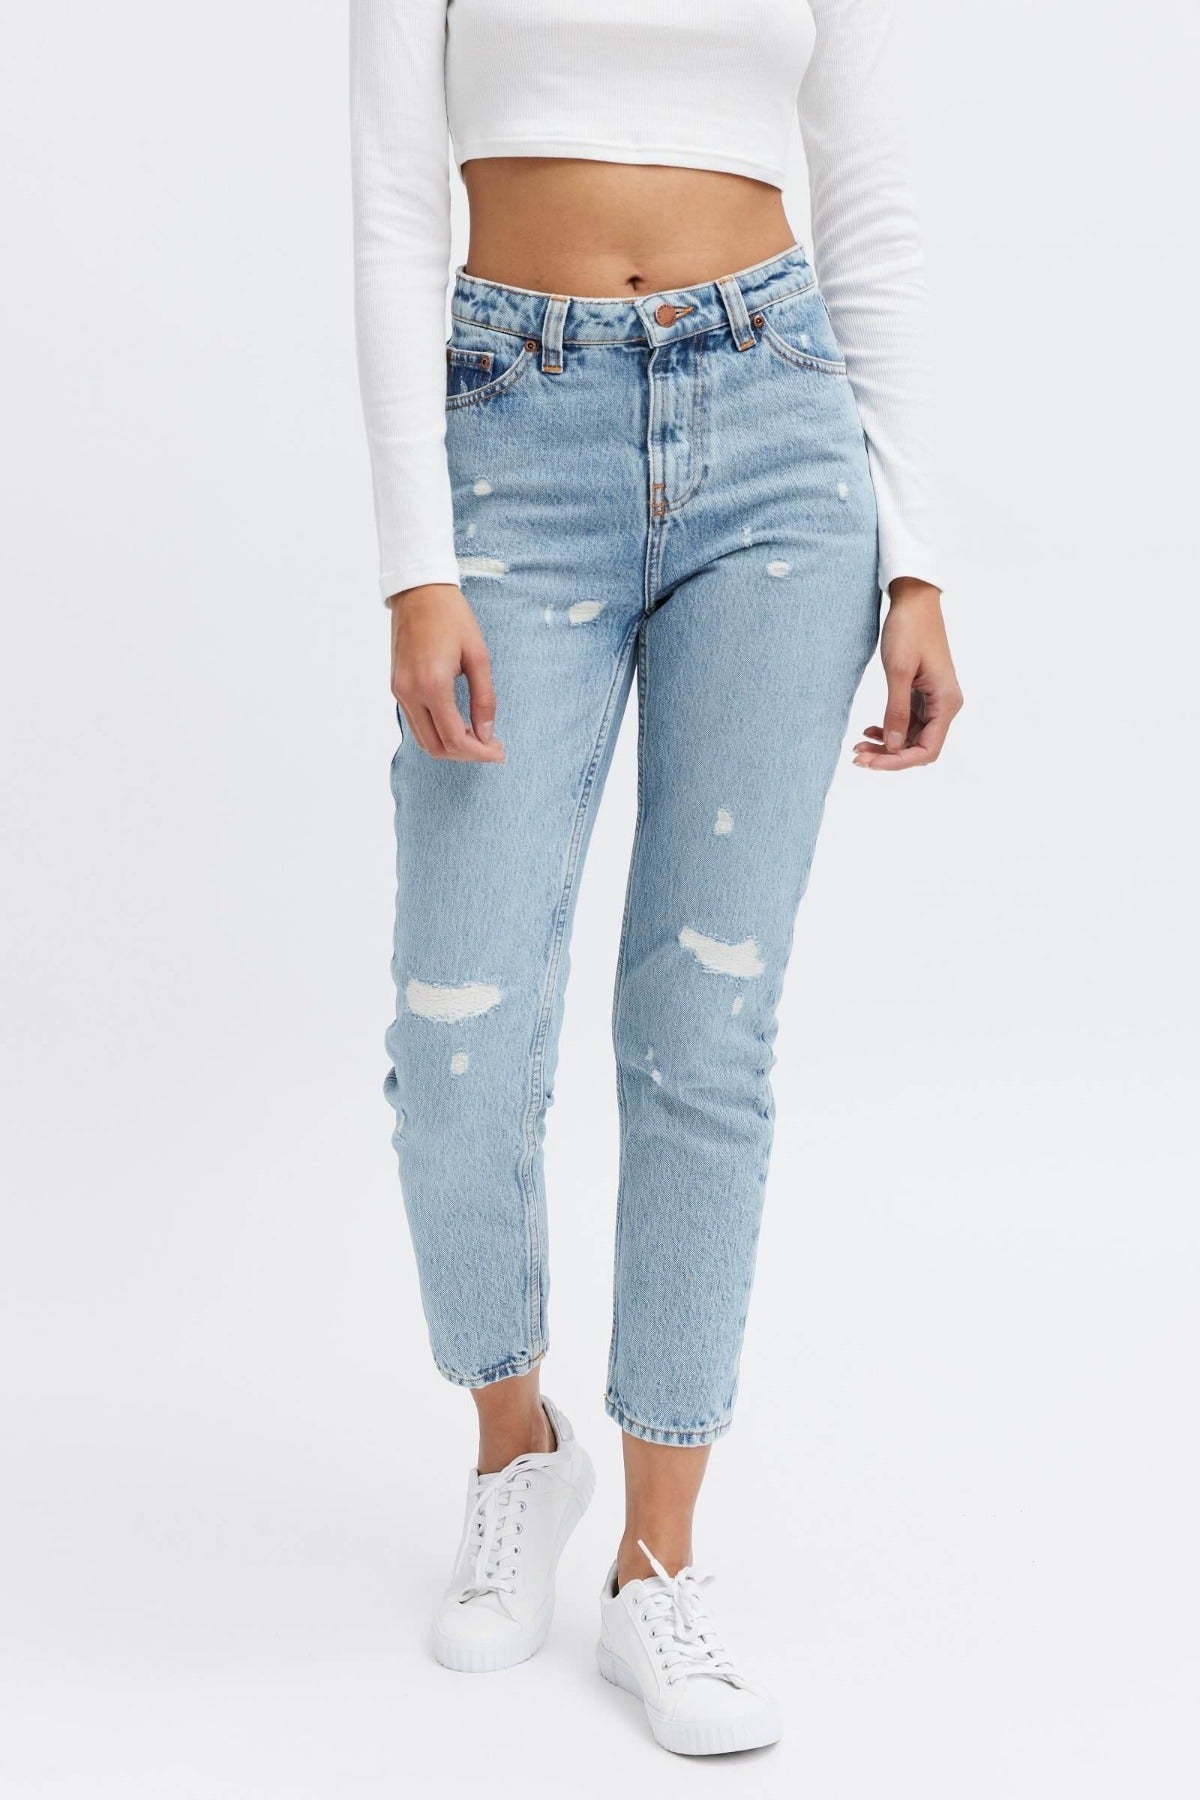 Ripped ethical jeans for women. Oxygen shorty  